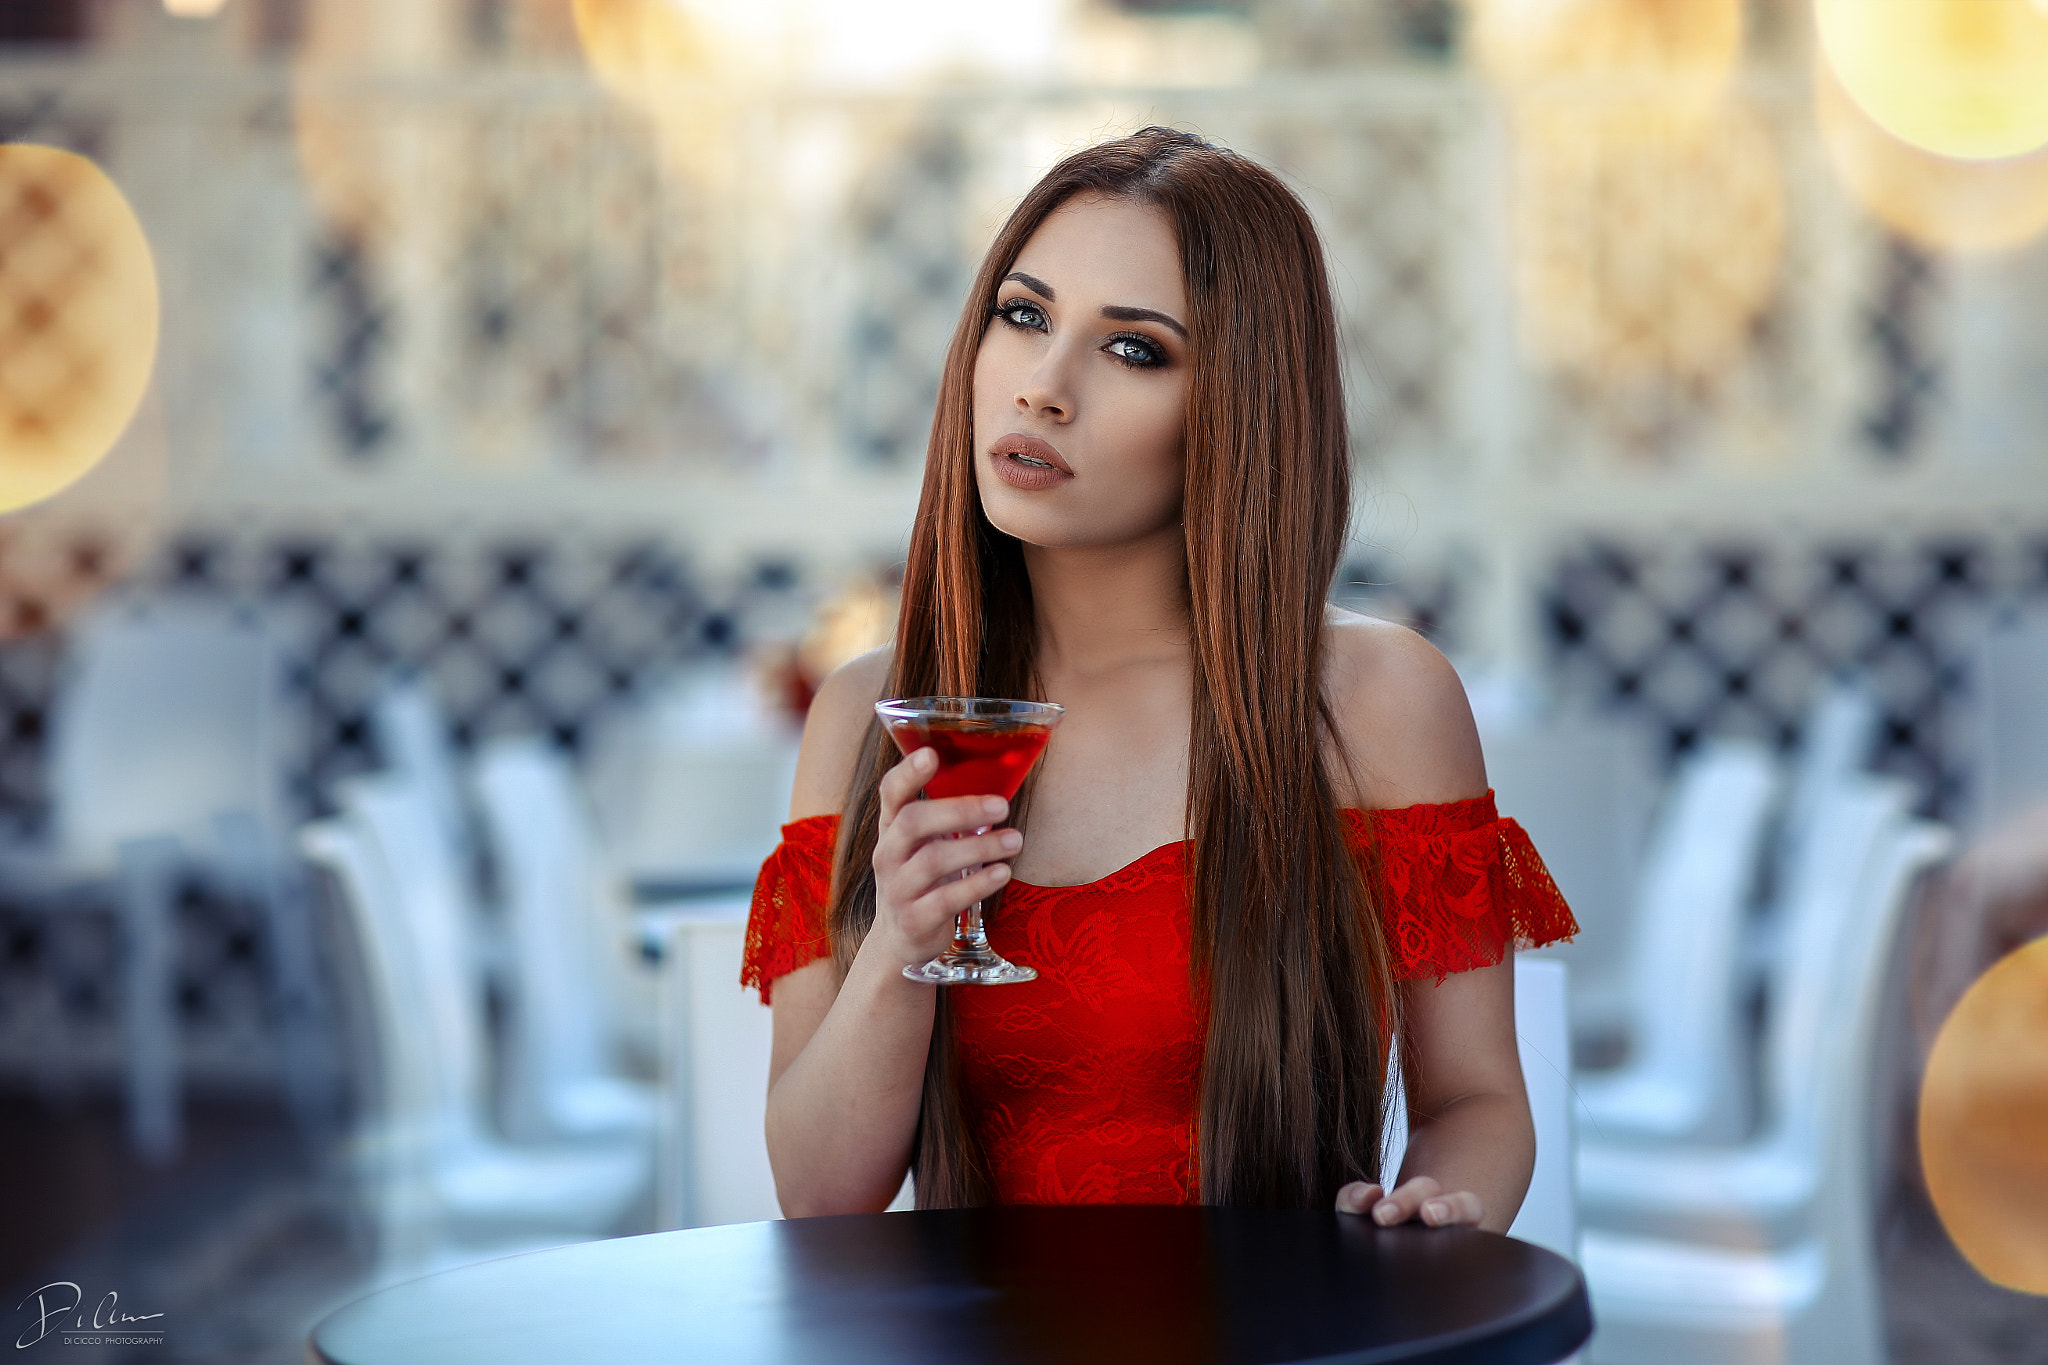 People 2048x1365 women drinking glass table blue eyes depth of field portrait long hair red dress Alessandro Di Cicco